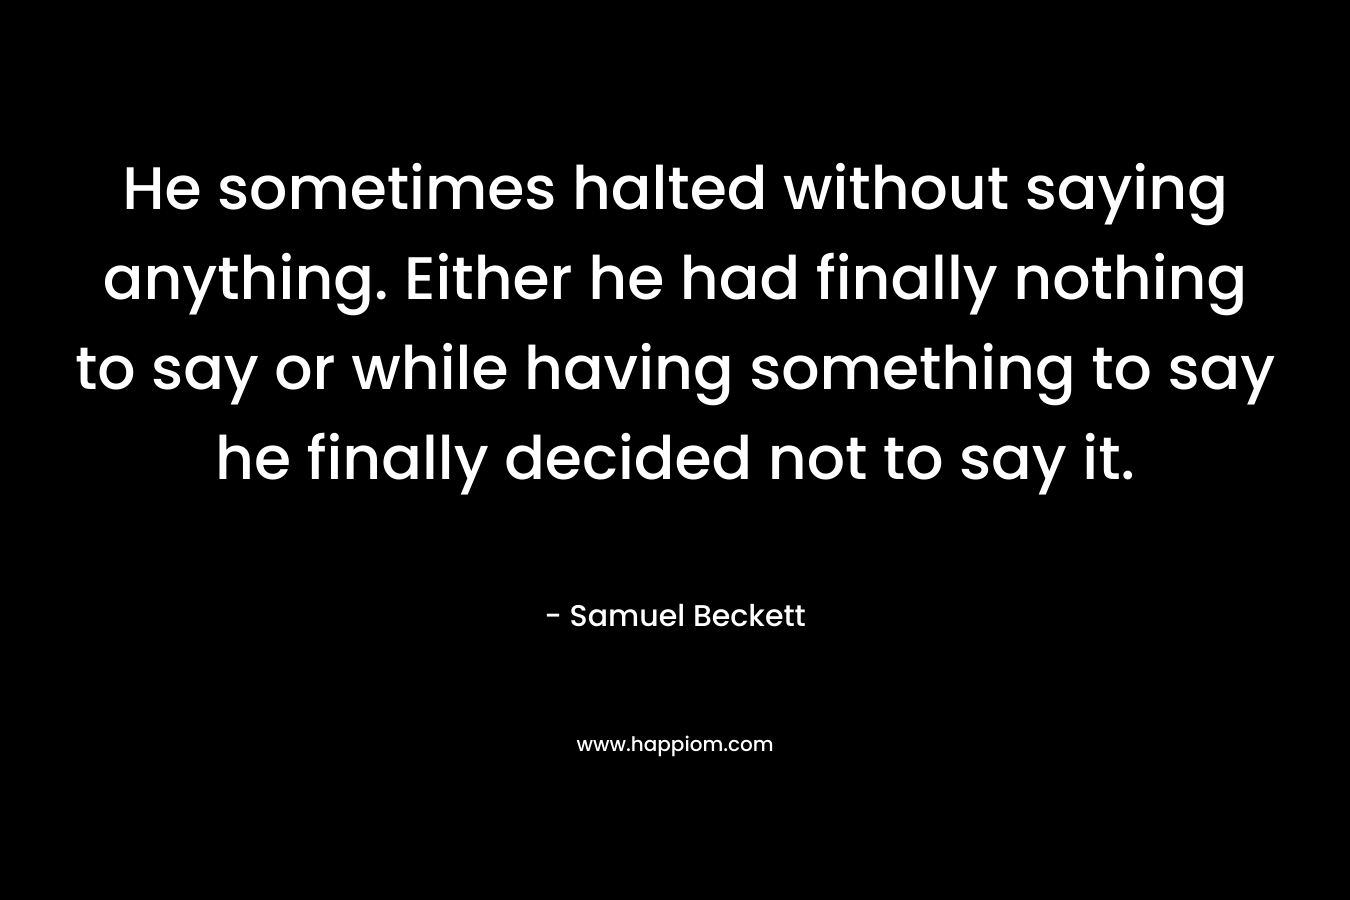 He sometimes halted without saying anything. Either he had finally nothing to say or while having something to say he finally decided not to say it.